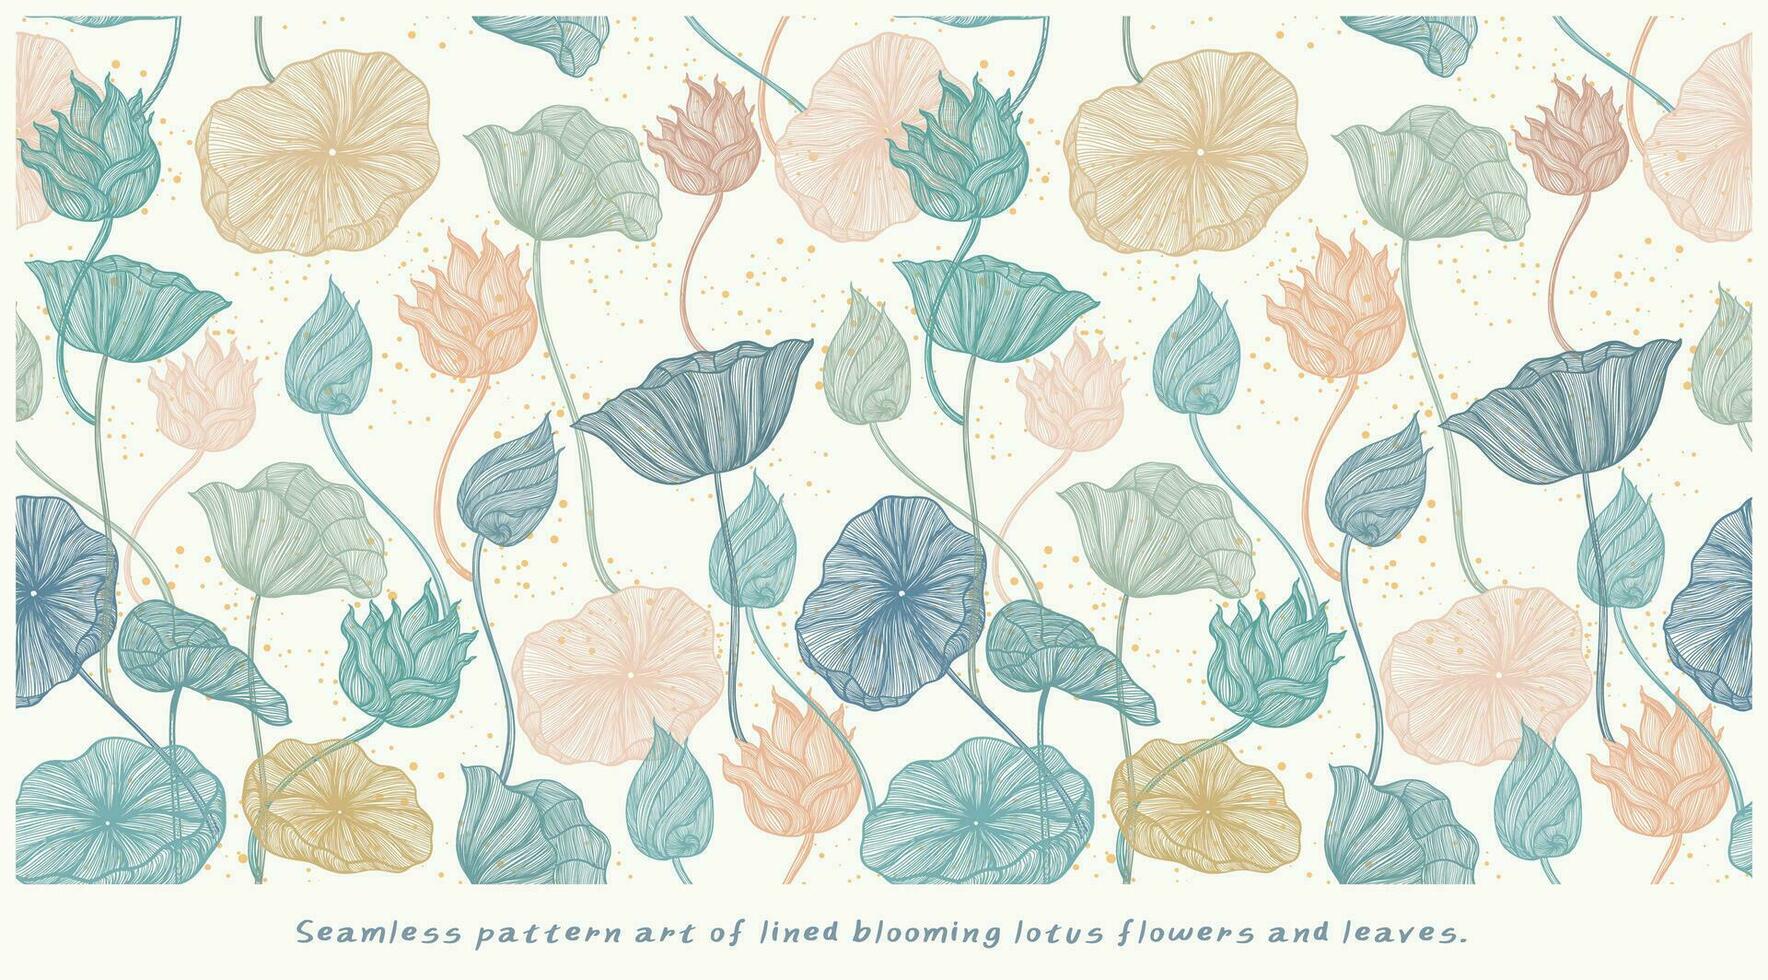 Seamless pattern art of lined blooming lotus flowers and leaves vector